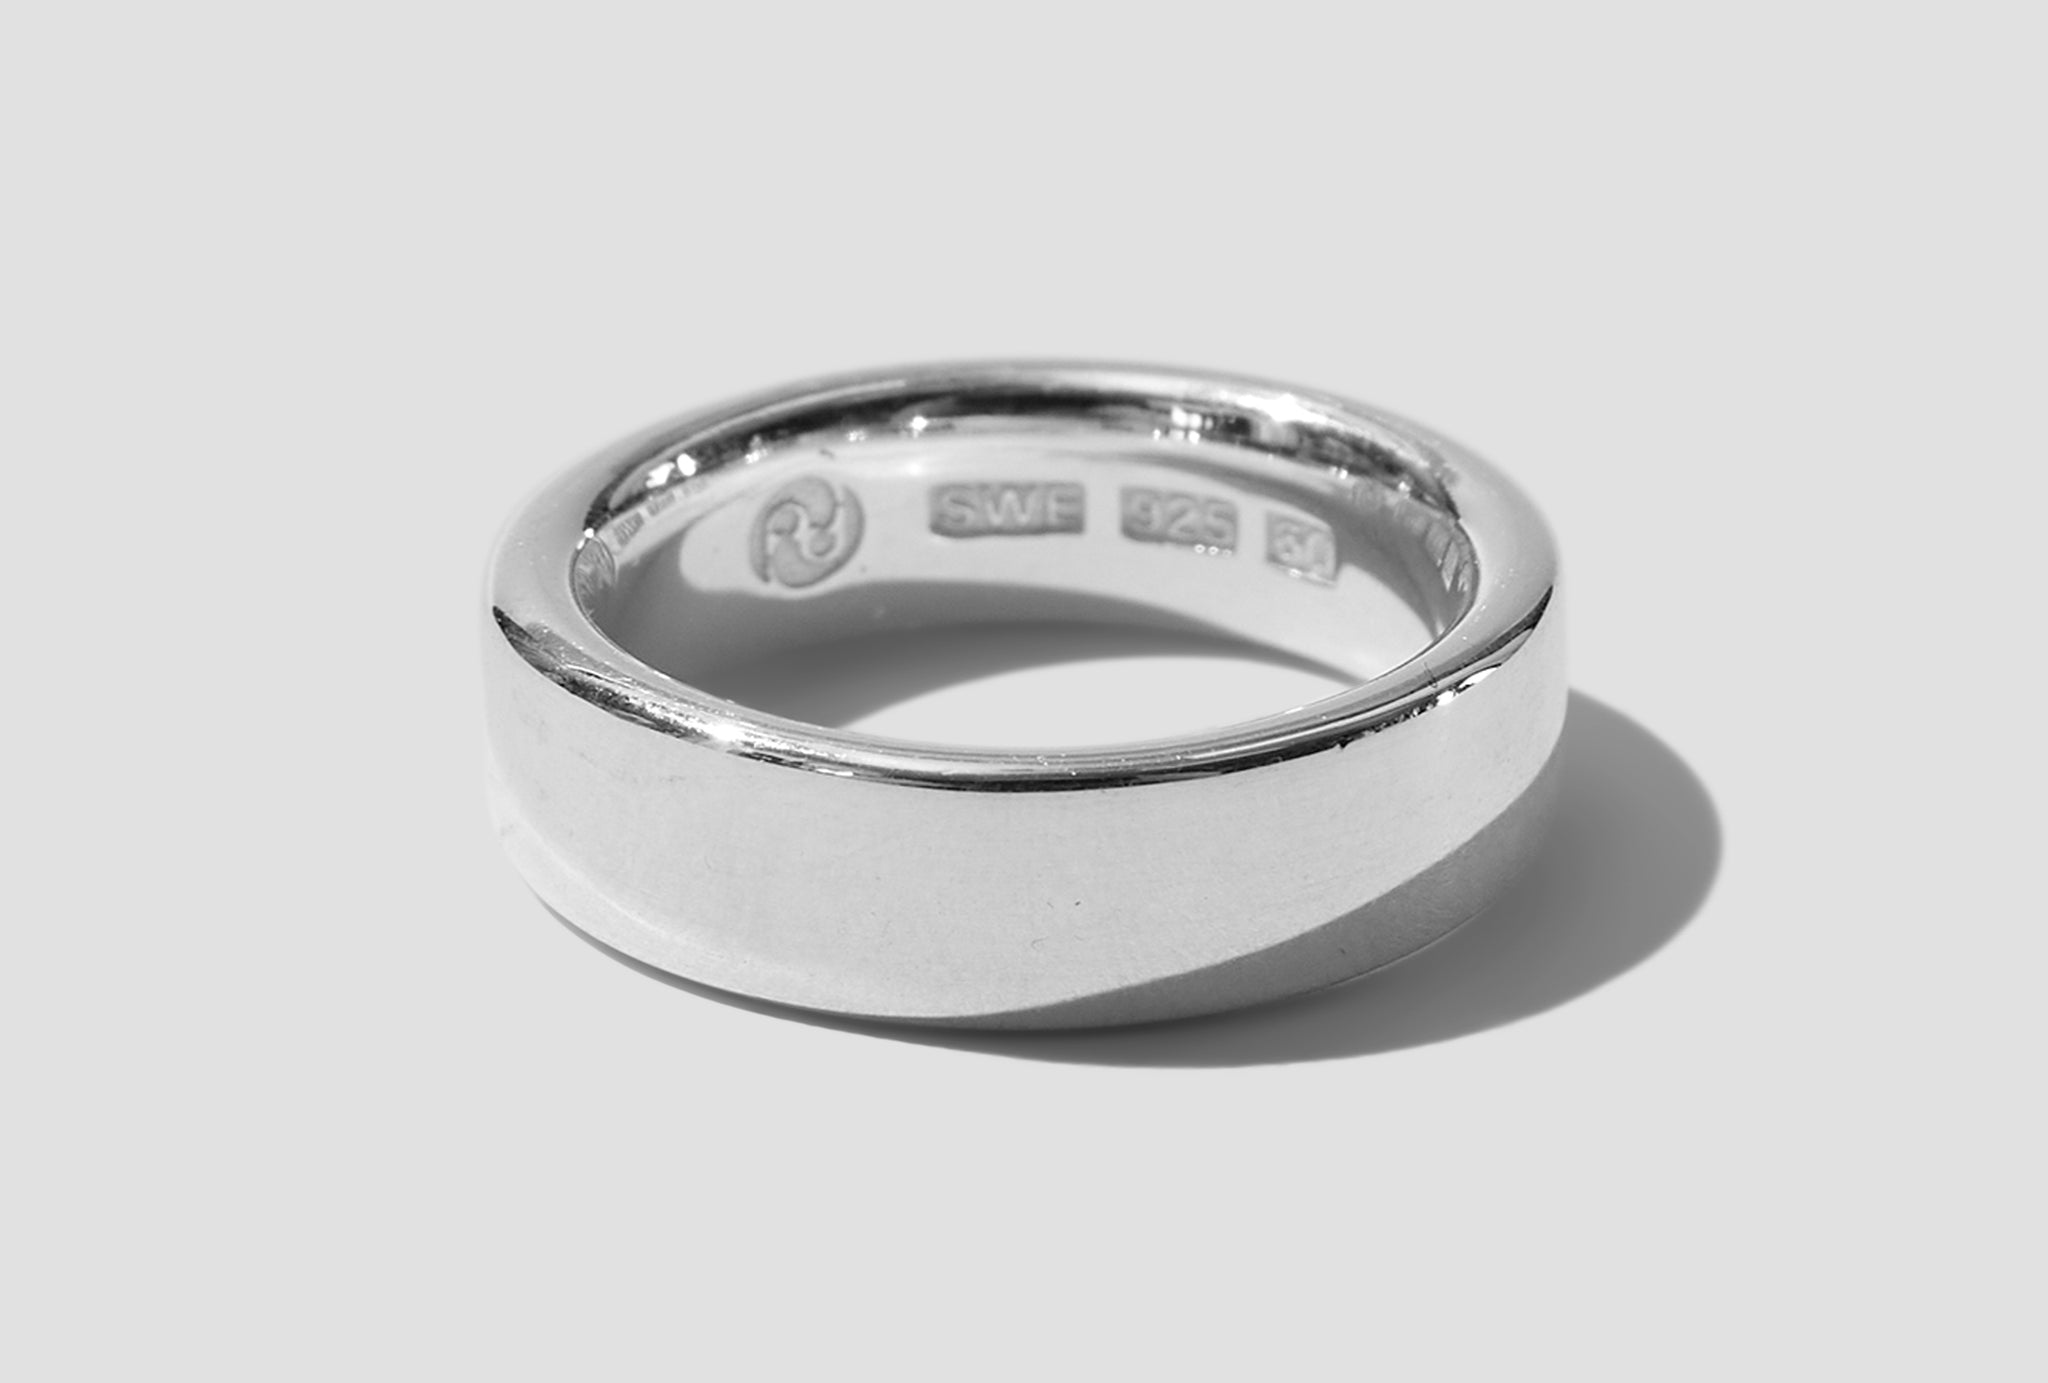 TIRE RING NARROW - POLISHED / STERLING SILVER 101722 Silver